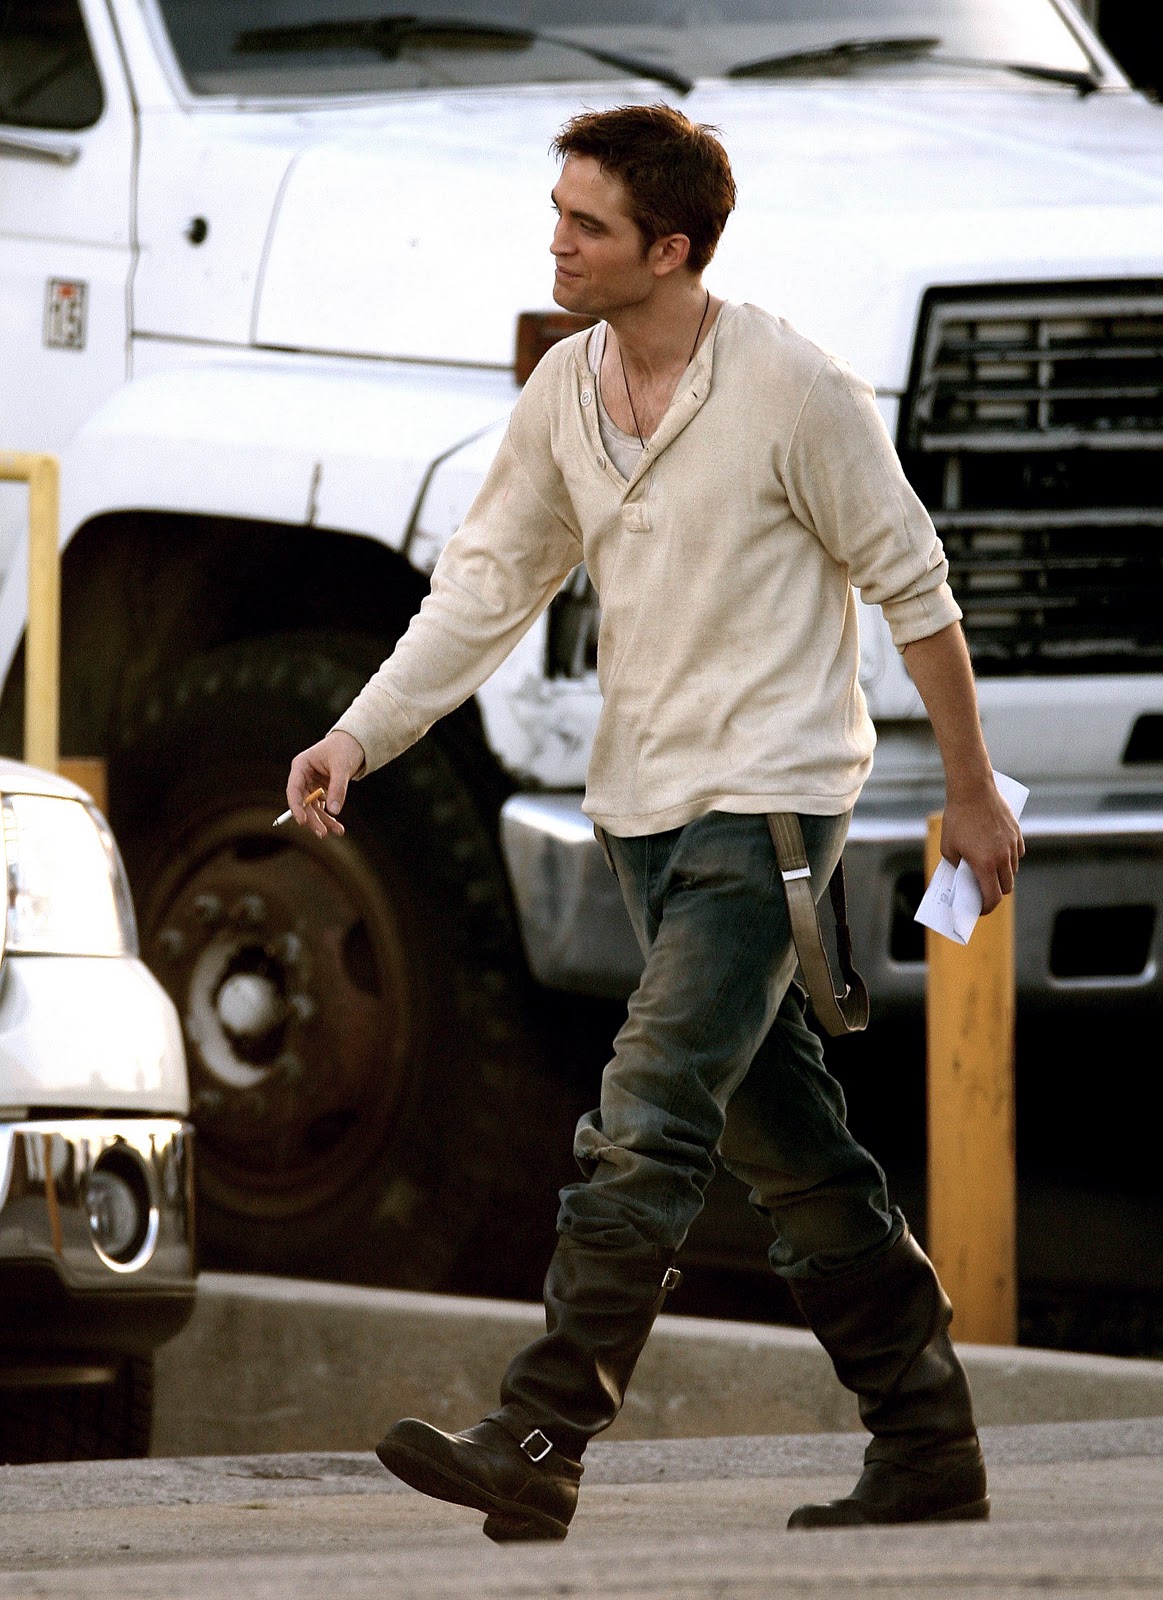 Pattinson Gallery: HQ Pictures of Robert Pattinson on WFE Set Yesterday